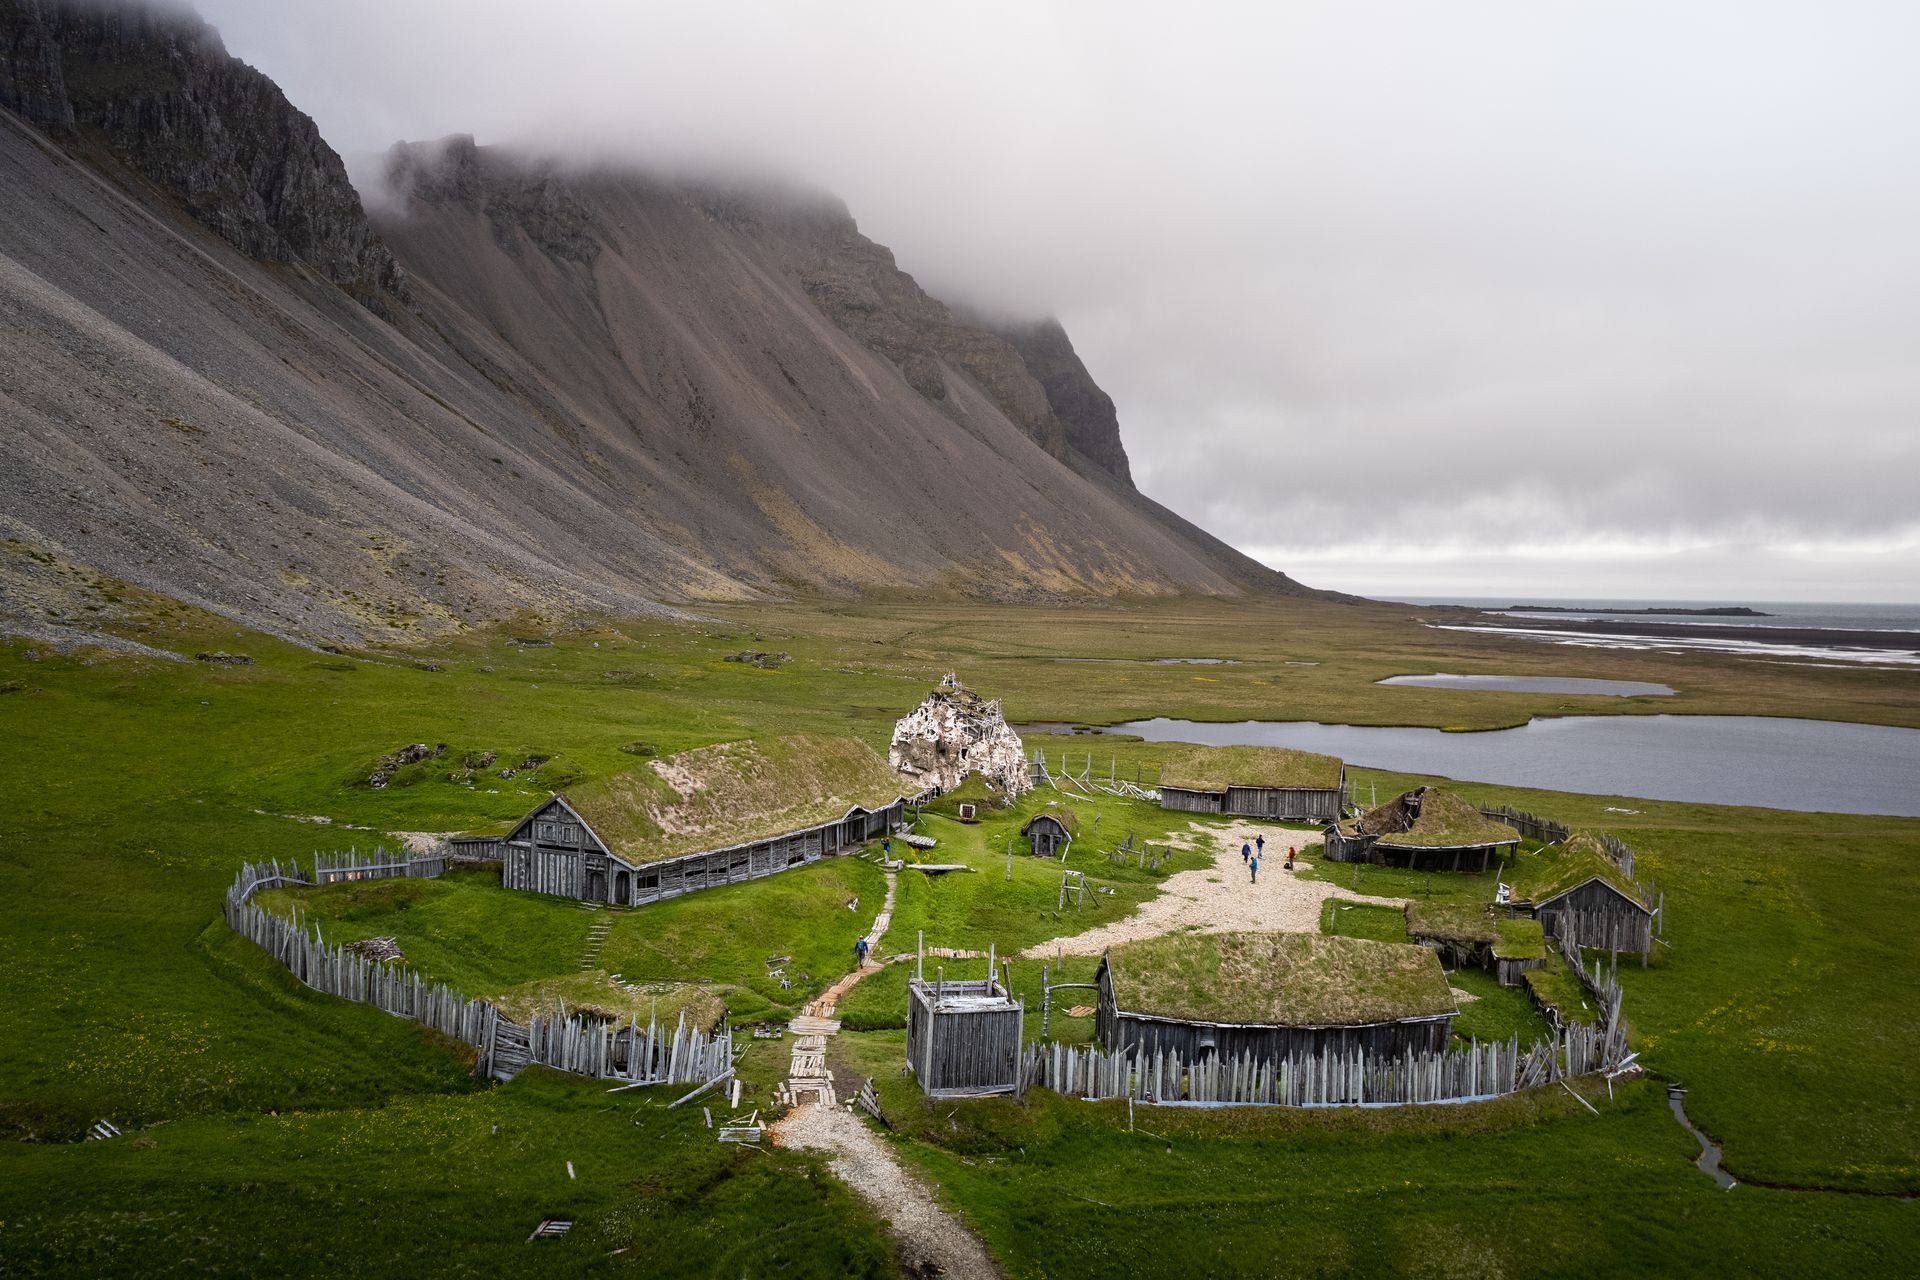 Vikings village and its green landscapes in Iceland surrounded by rocky hills on cloudy weather